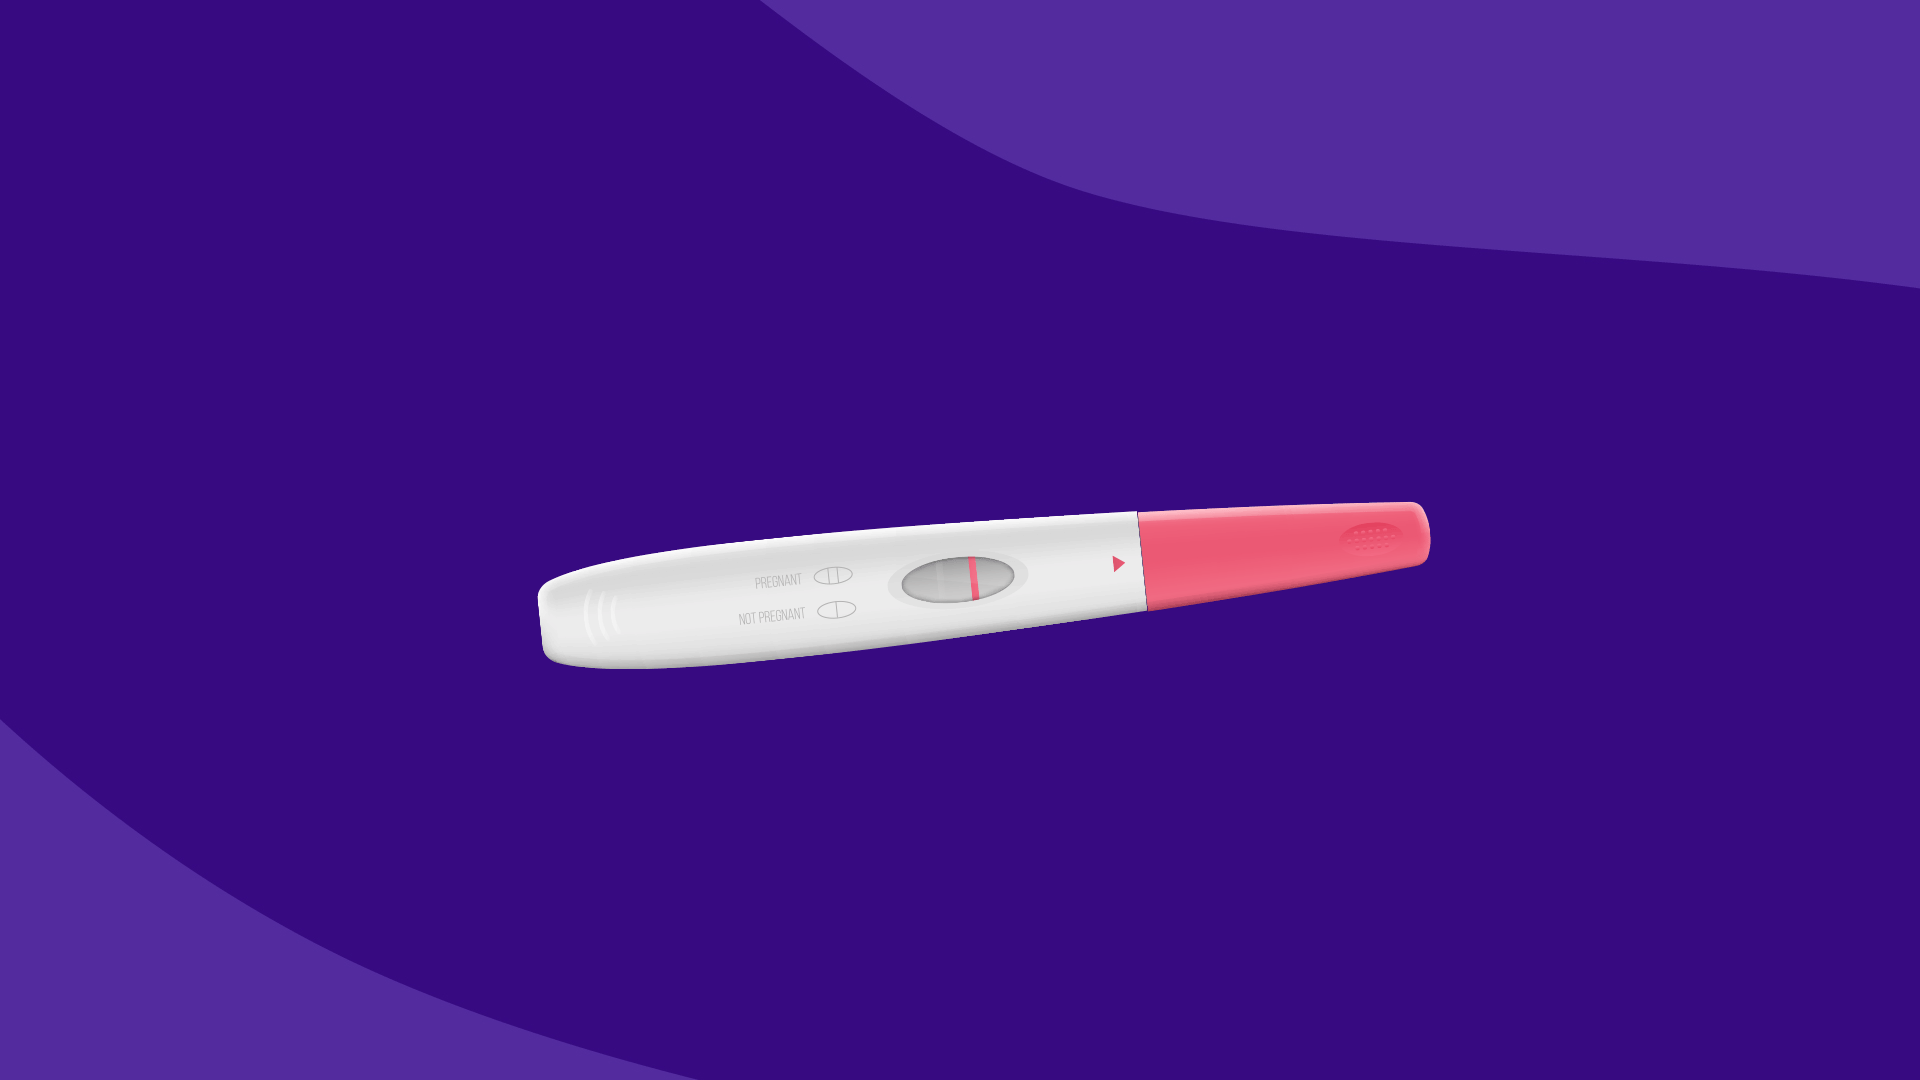 Did you know early spotting may be a sign you're pregnant? In fact,implantation  bleeding is fairly common and can occur in up to 25% of